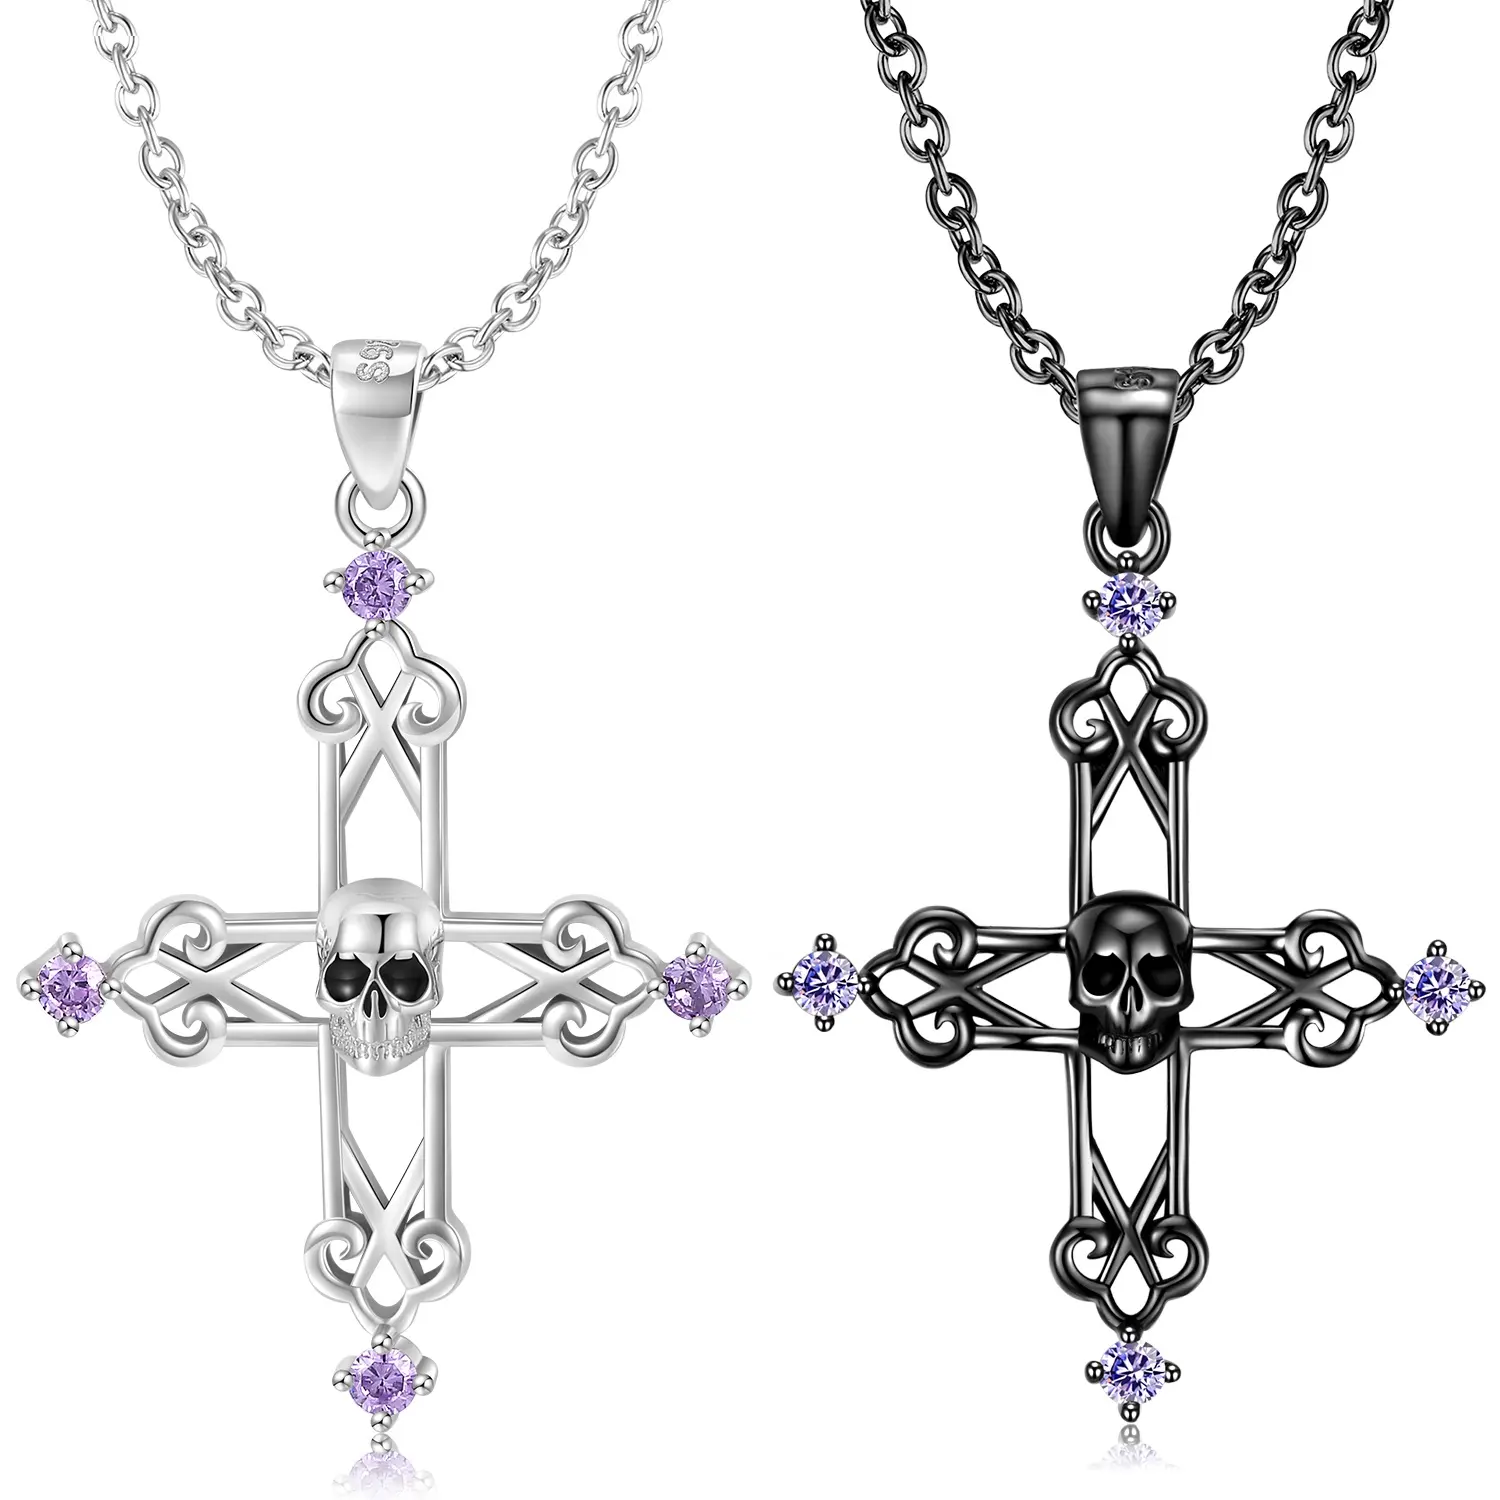 Skeleton Cross Necklace Pendant With Purple Zirconia Authentic 925 Sterling Silver For Amazon Women Necklace Jewelry Wholesale